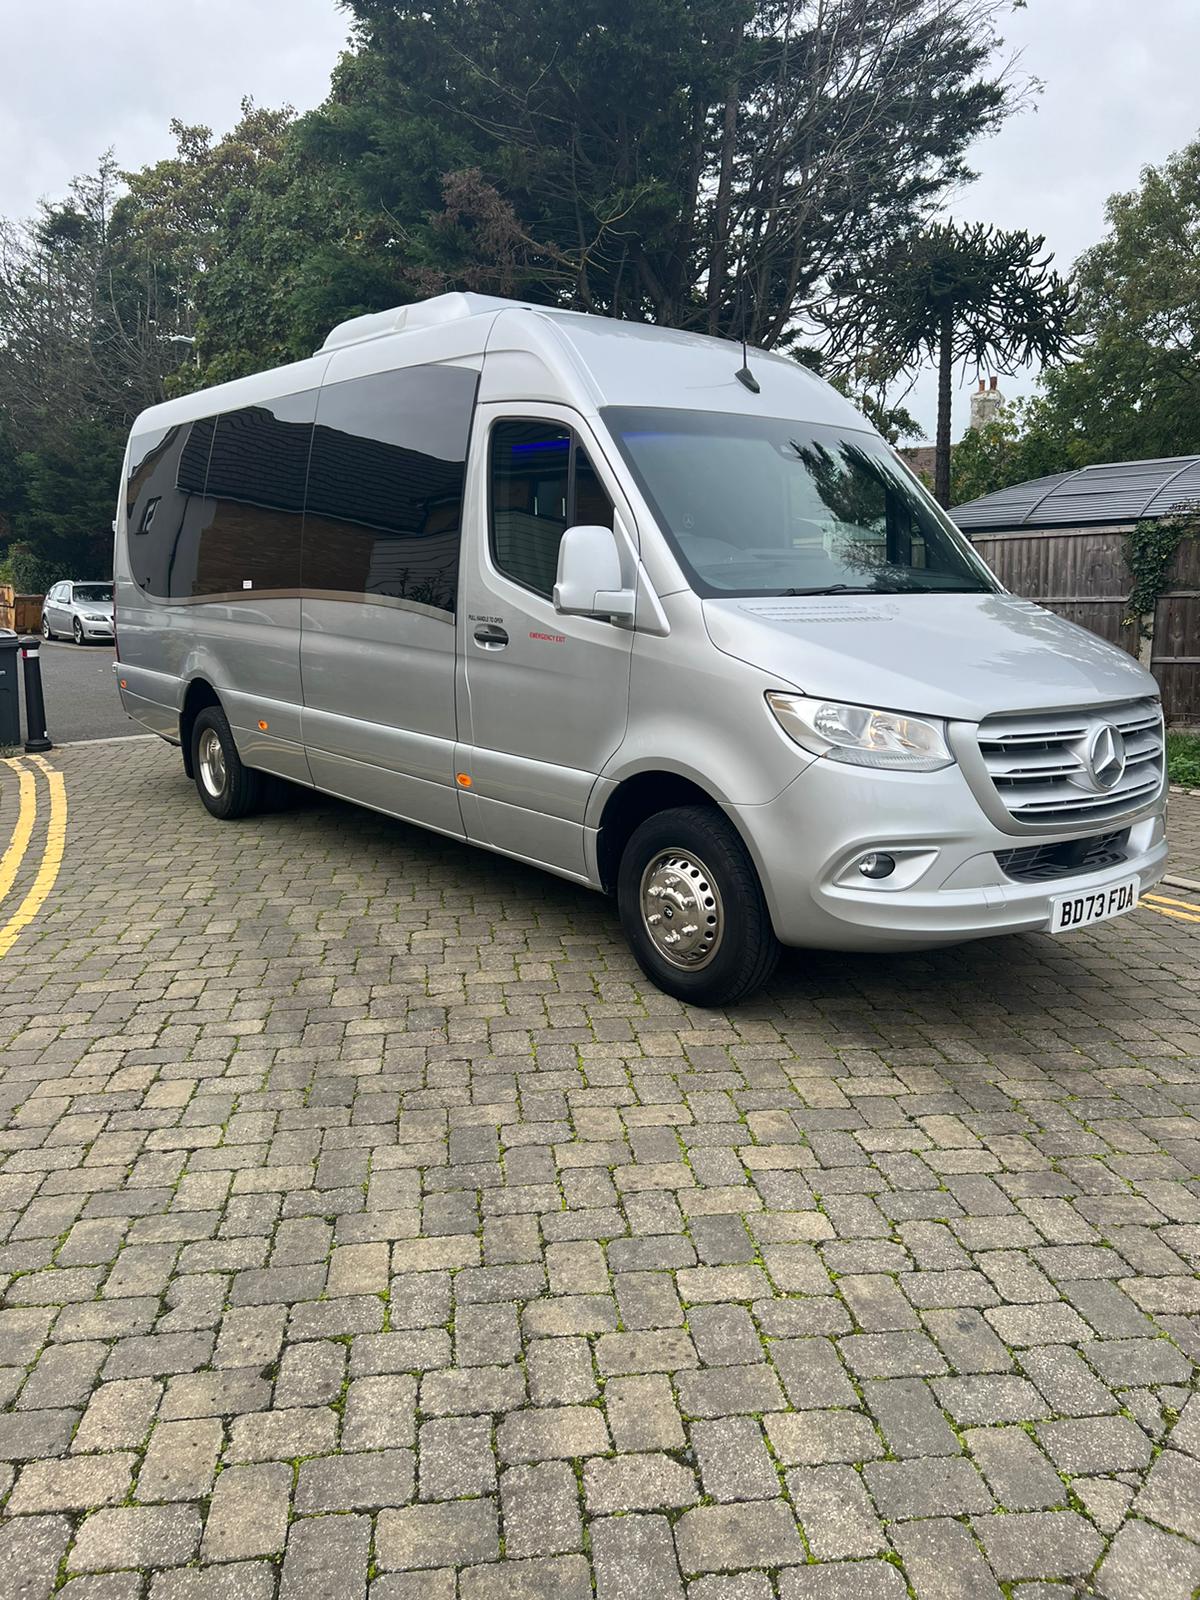 Exploring Haywards Heath: A Complete Guide to 16 Seater Minibus Hire Options